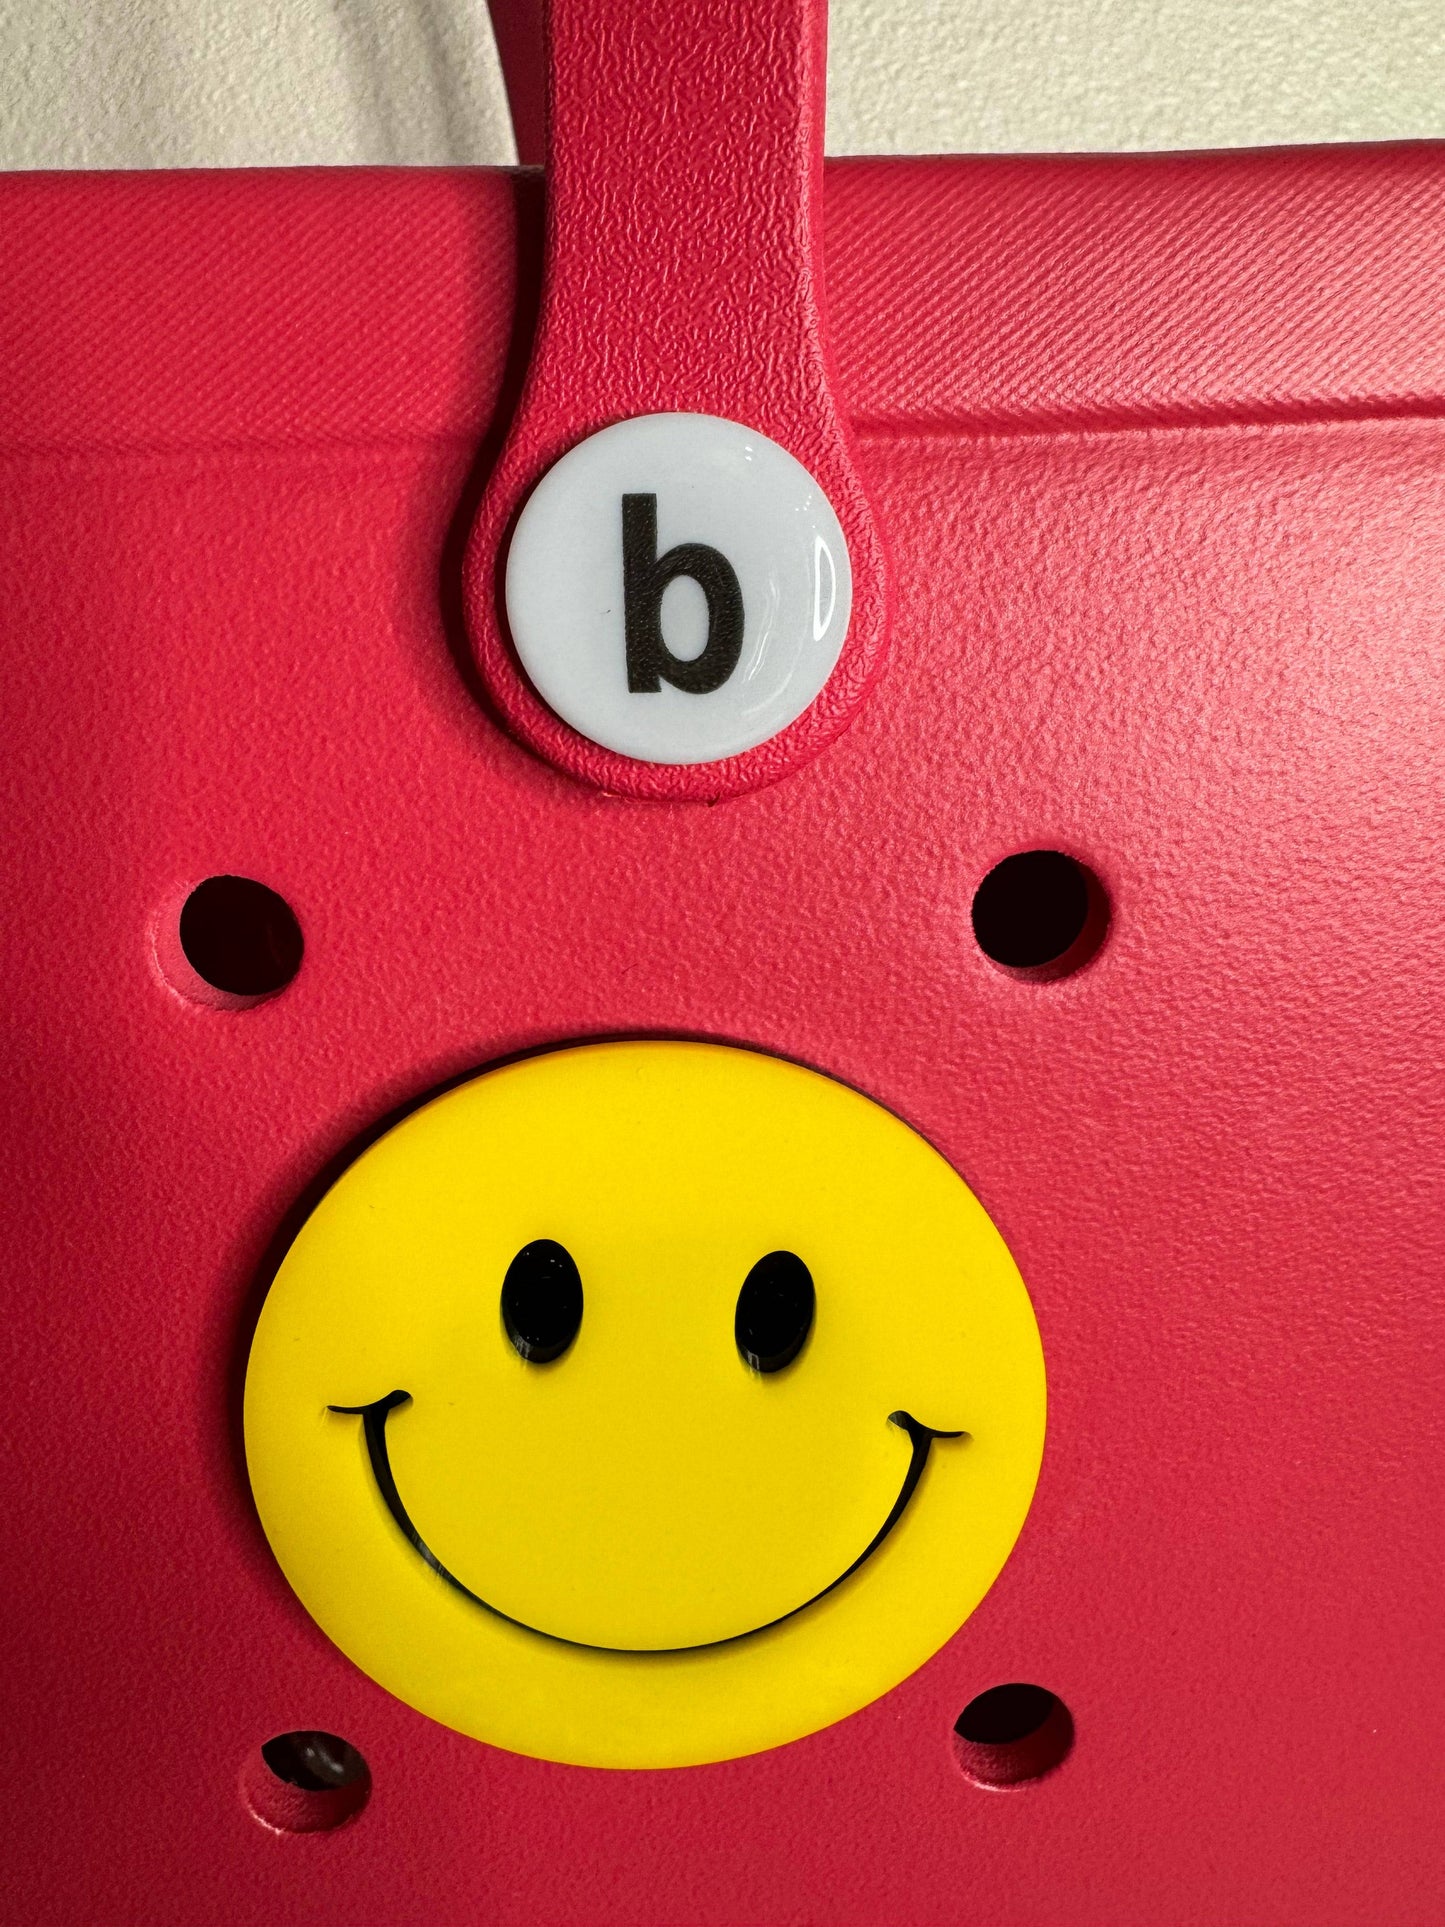 Smiley Face Charm for Bogg Bags - Happy Face Bag Accessory - Cheerful Bogg Bag Charm - Yellow Smiley Emoji - Gift for Her